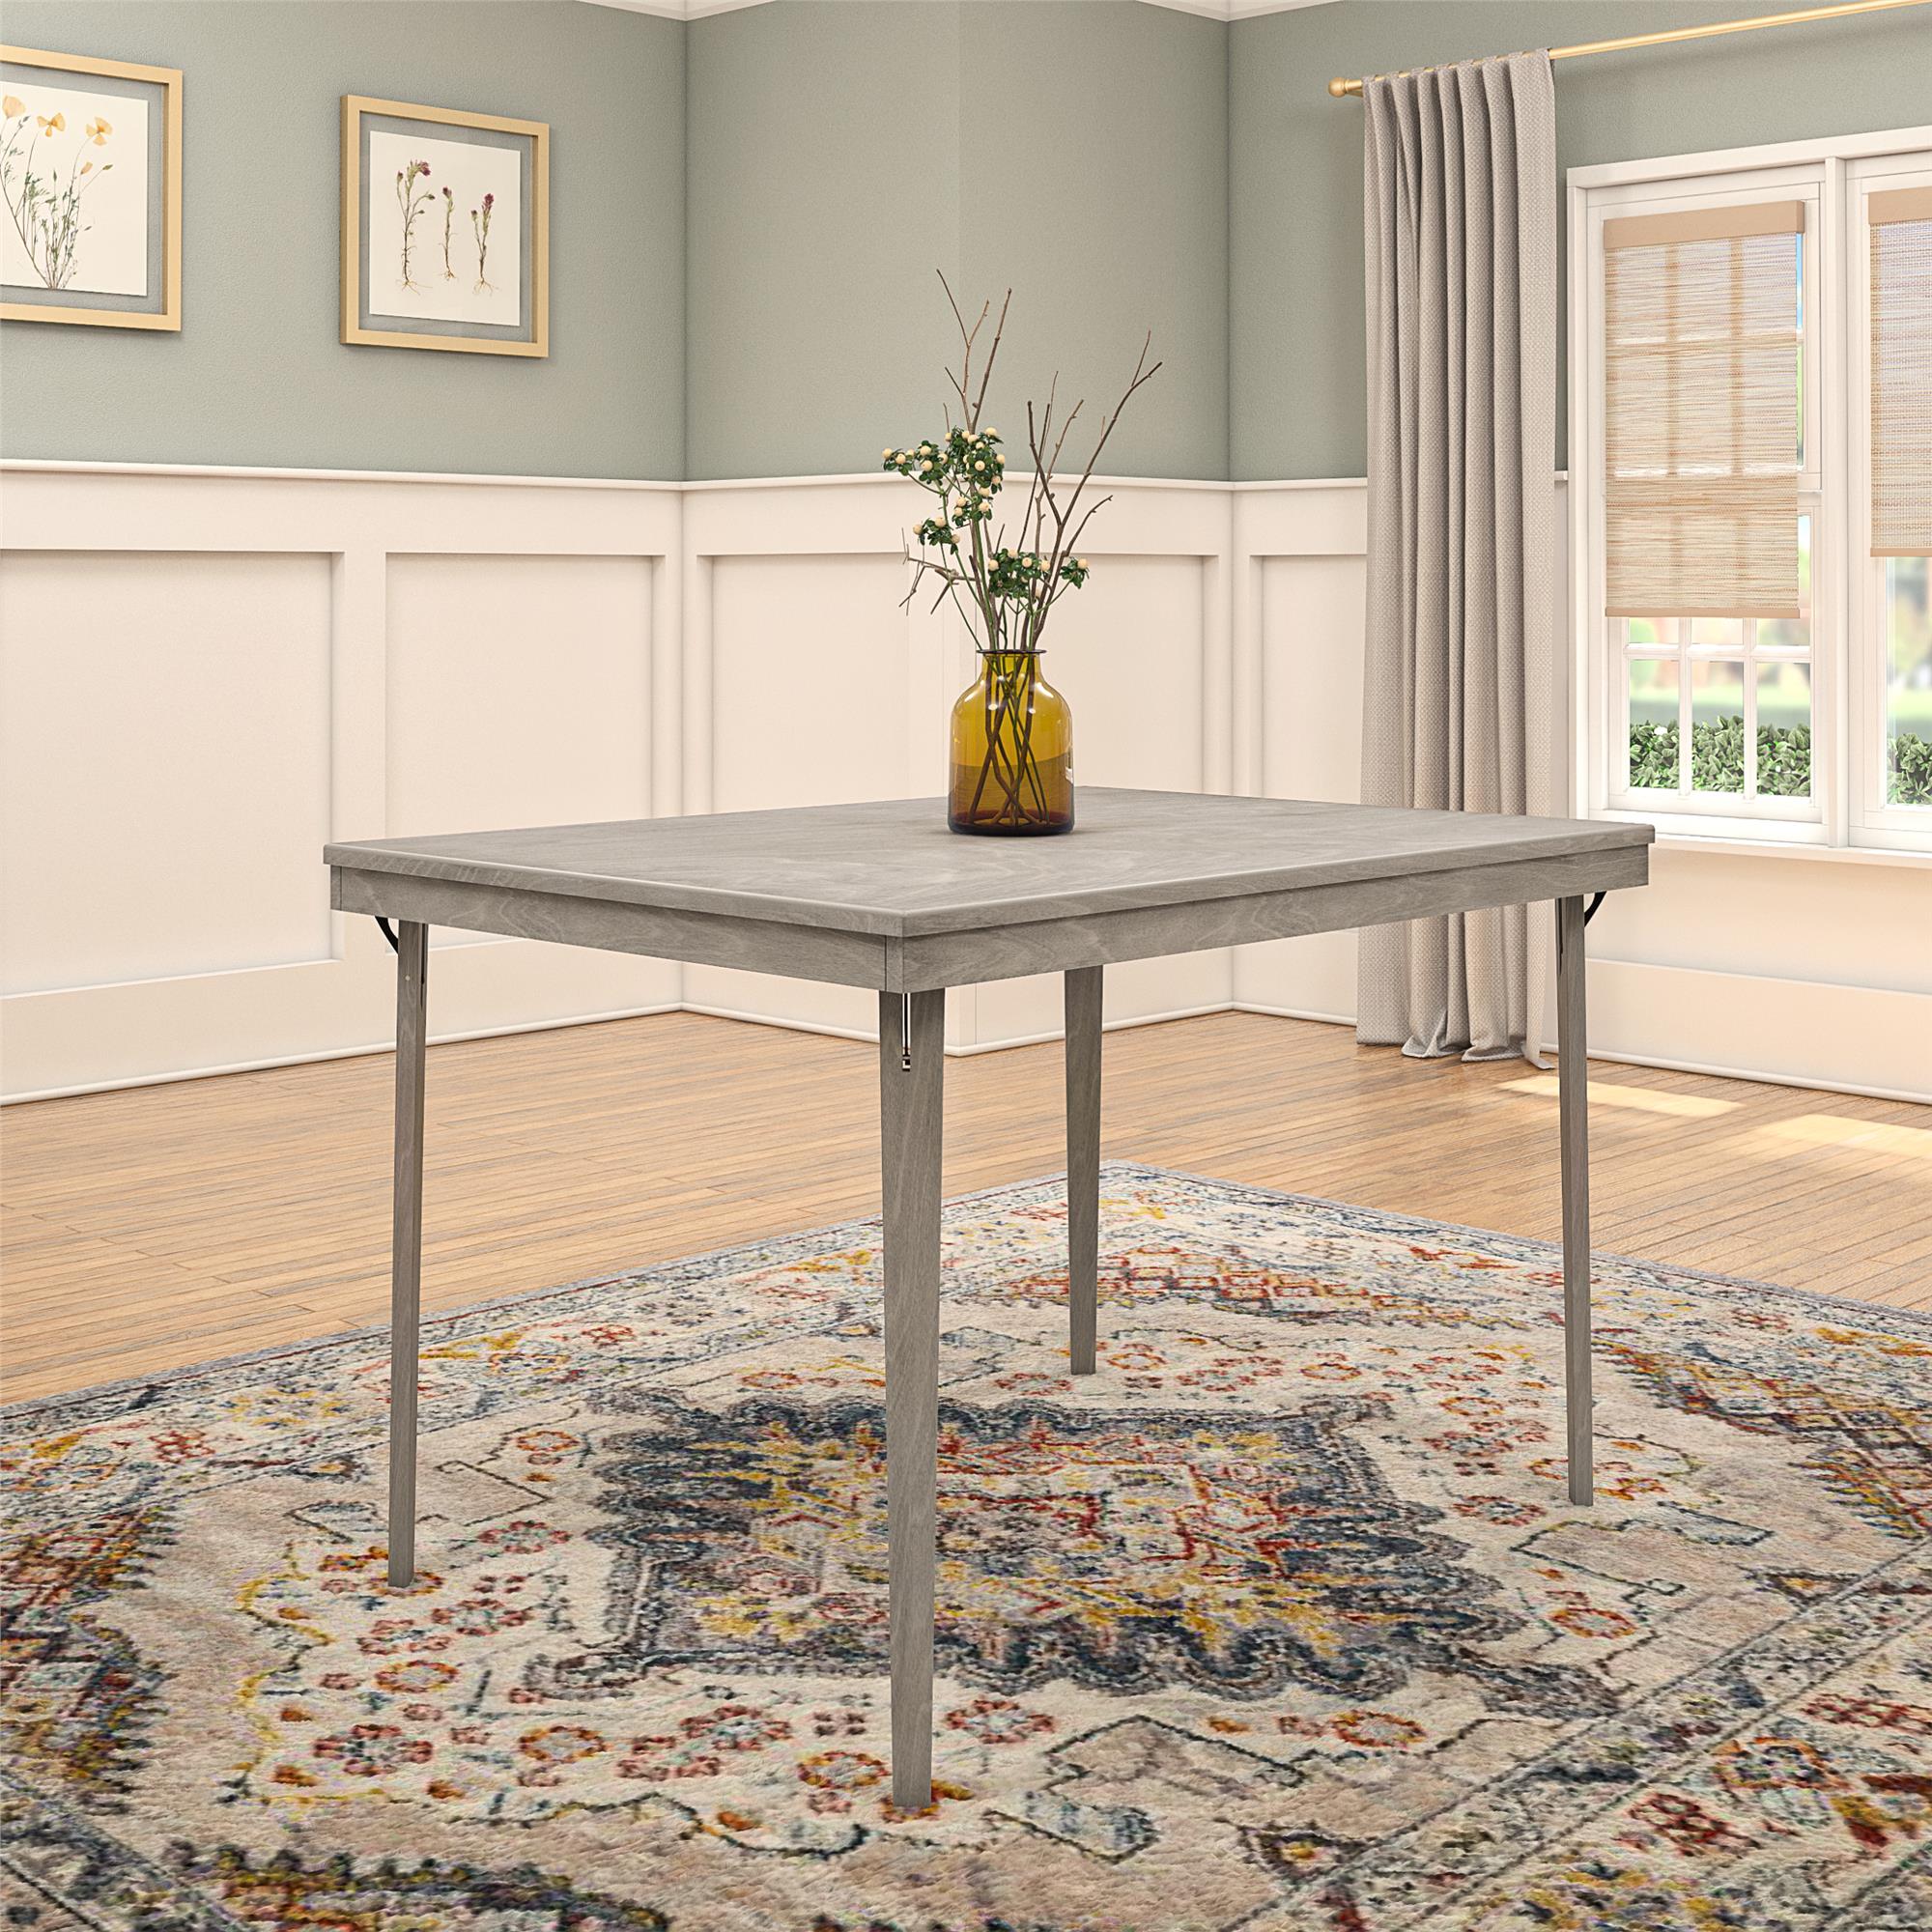 44" x 32" Solid Wood Folding Dining Table - Light Gray - N/A